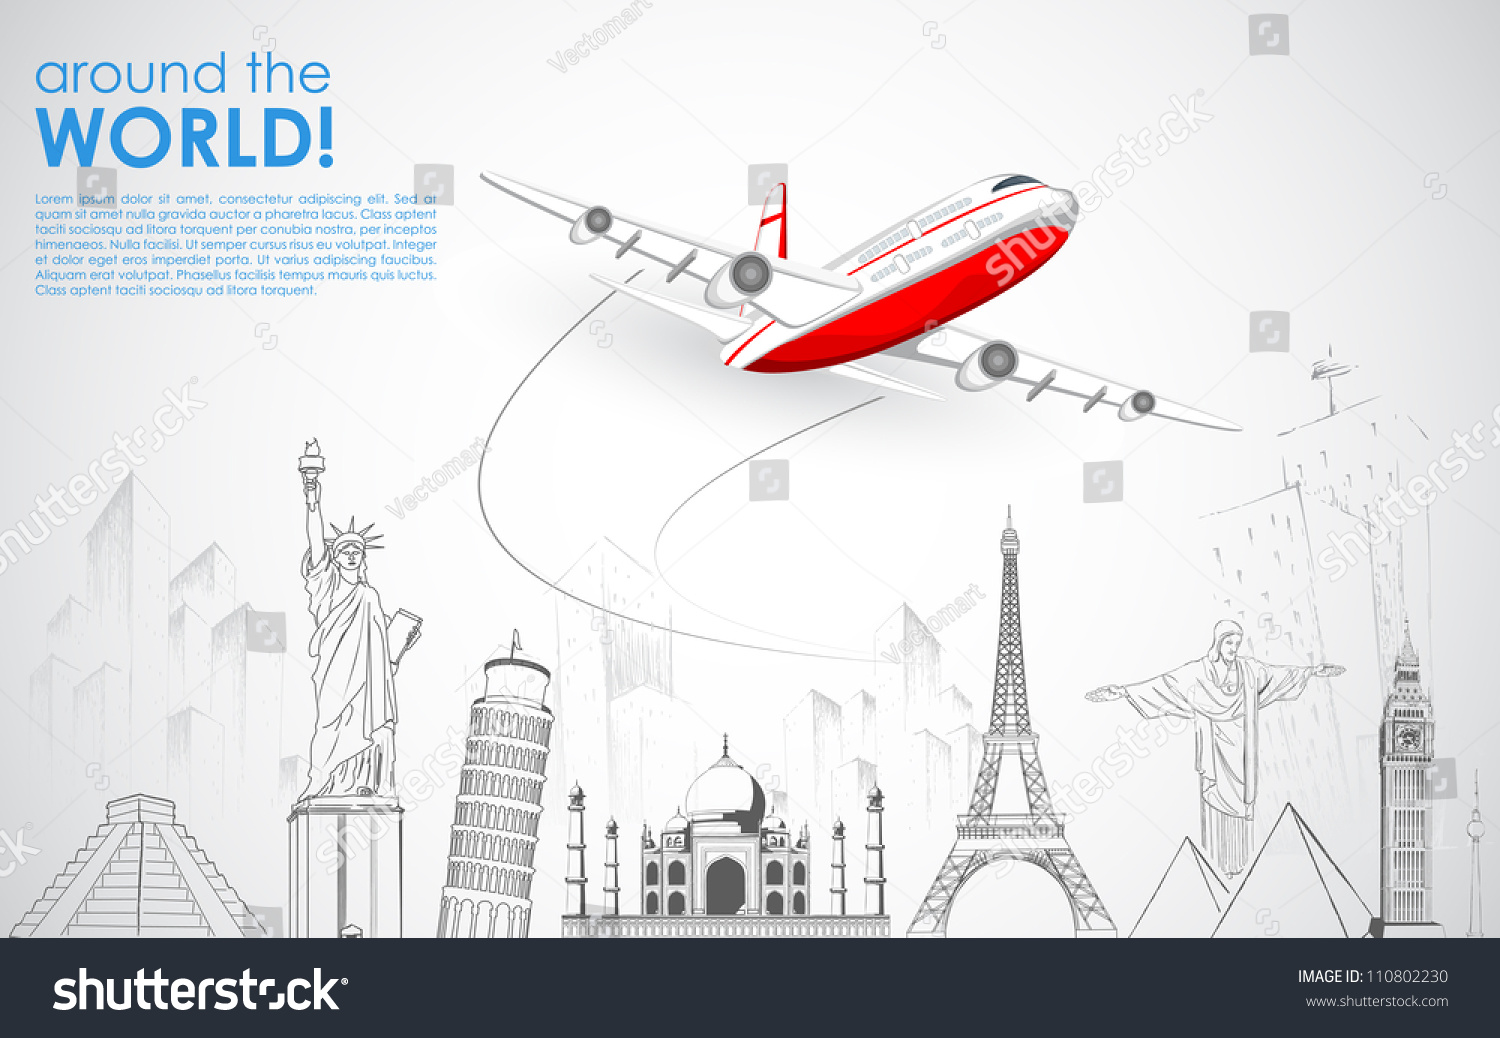 SVG of illustration of airplane flying over sketch of famous monument svg